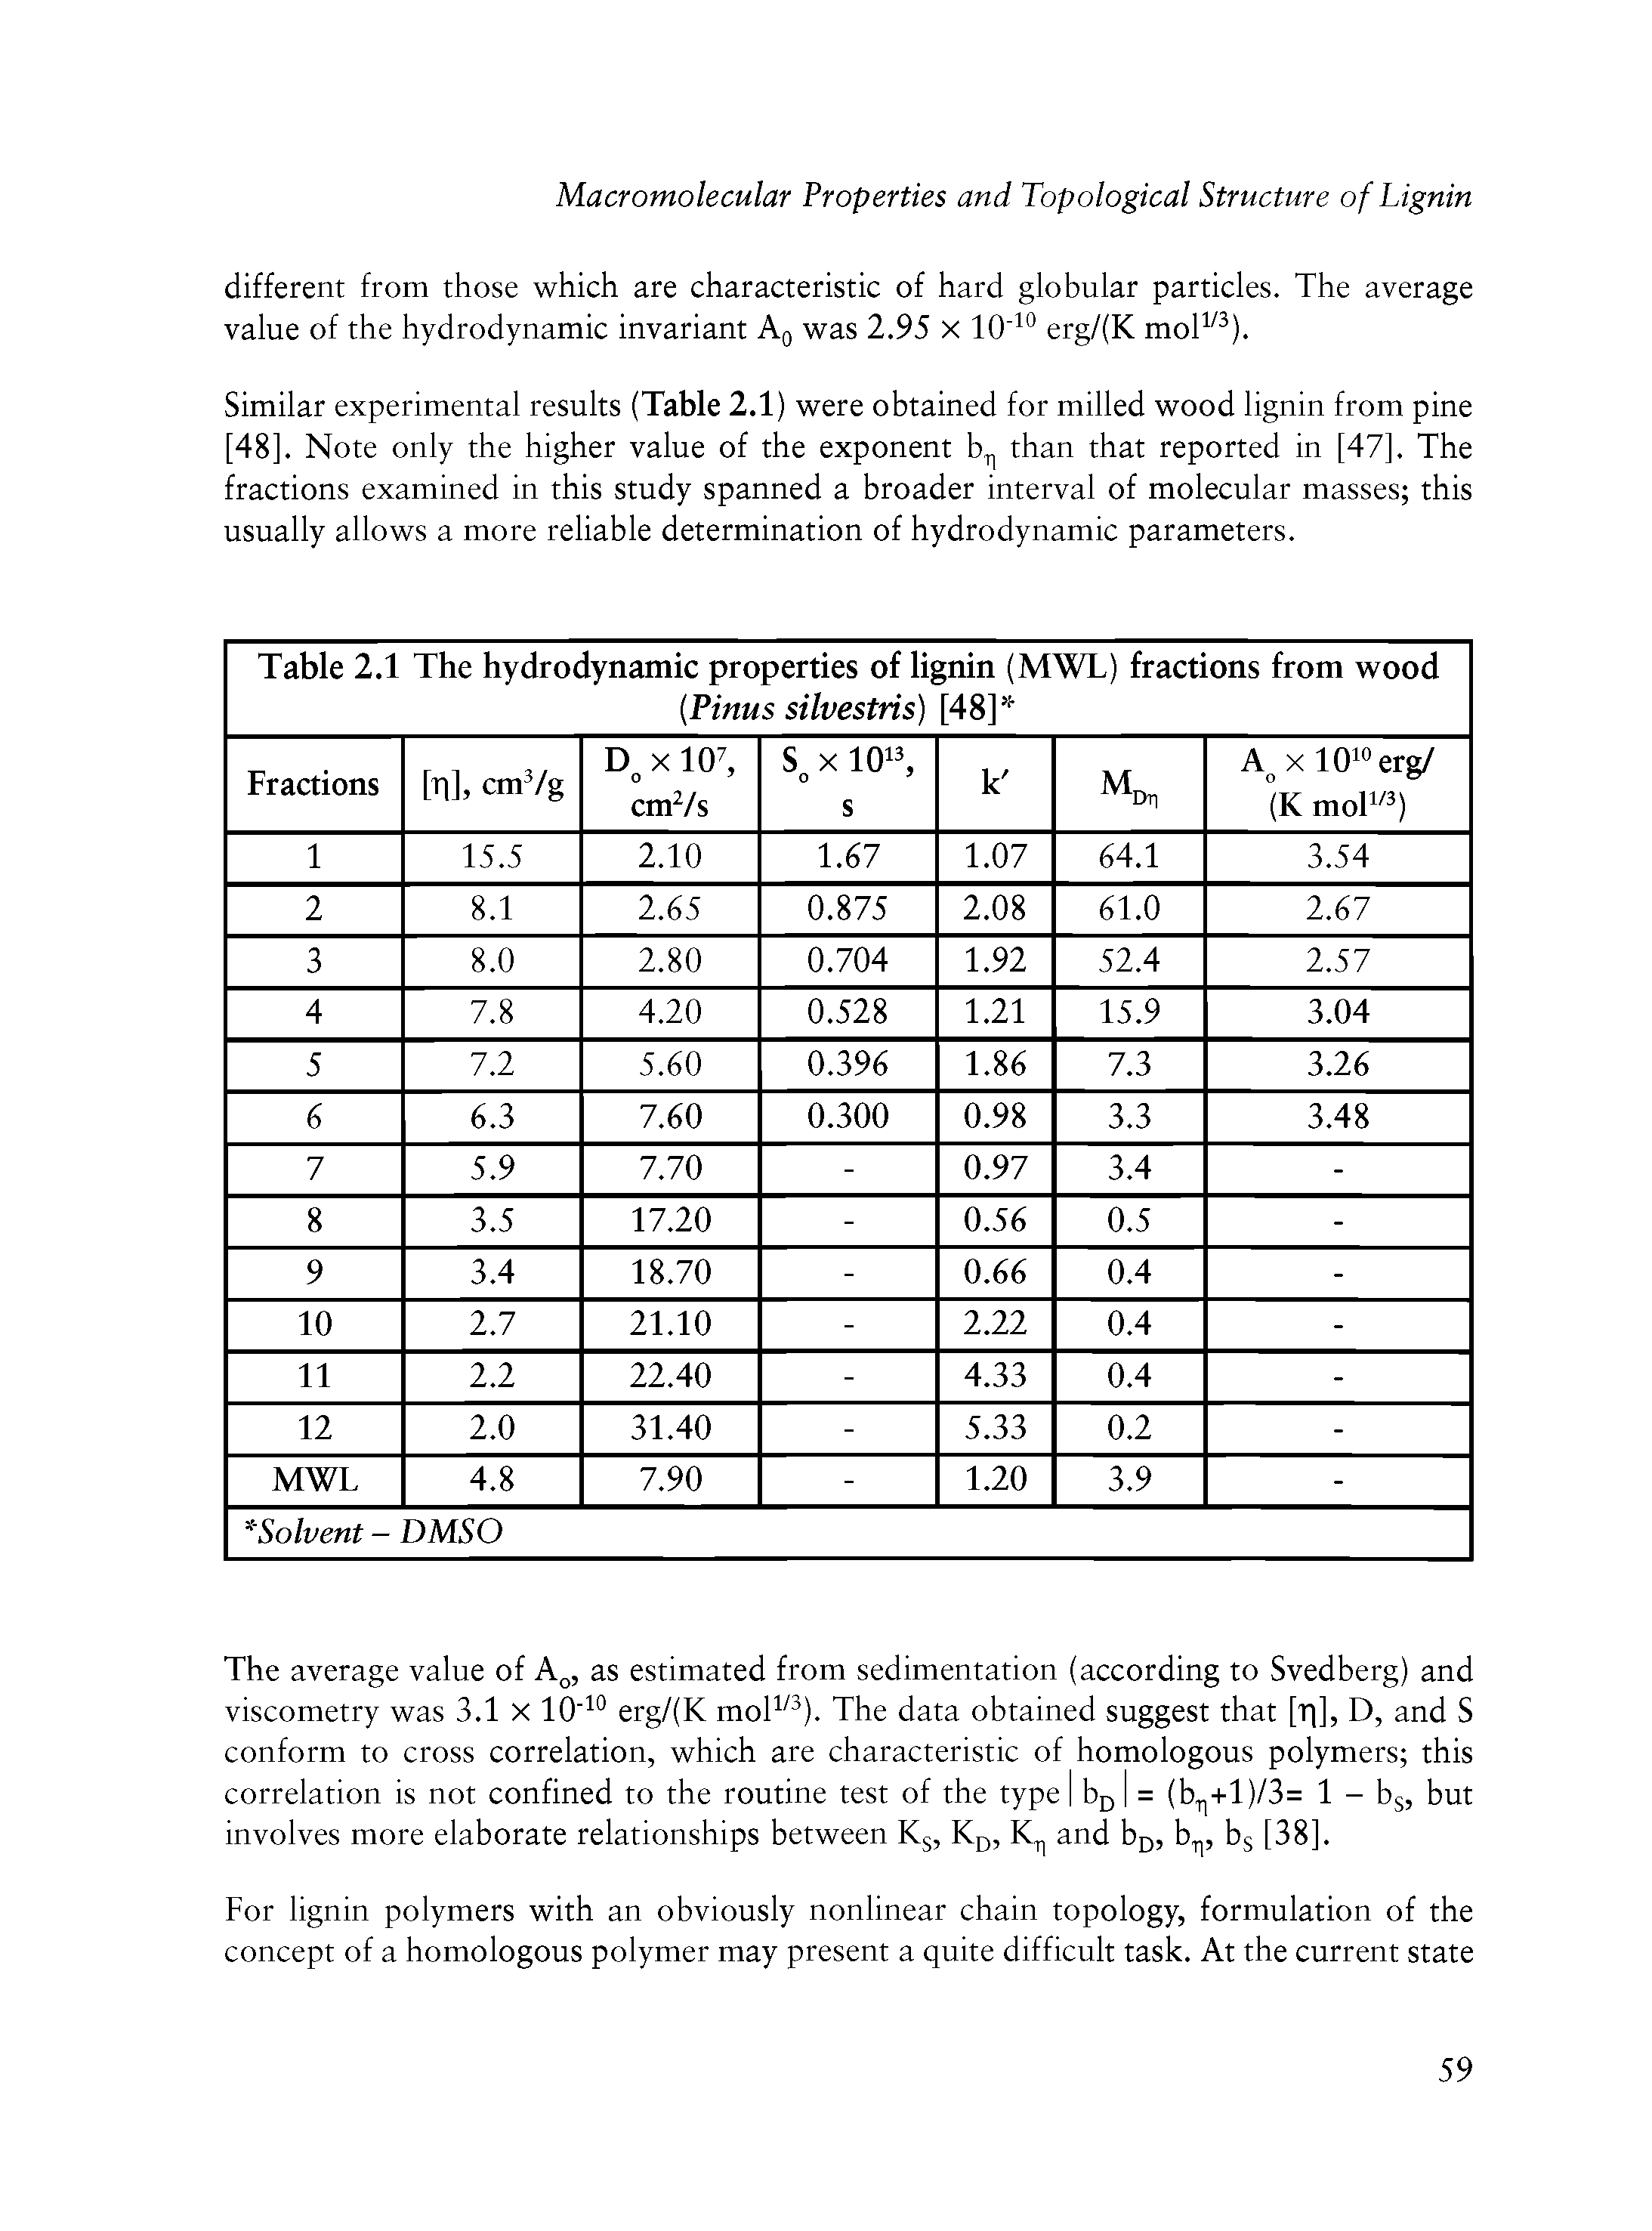 Table 2.1 The hydrodynamic properties of lignin (MWL) fractions from wood Pinus silvestris) [48] ...